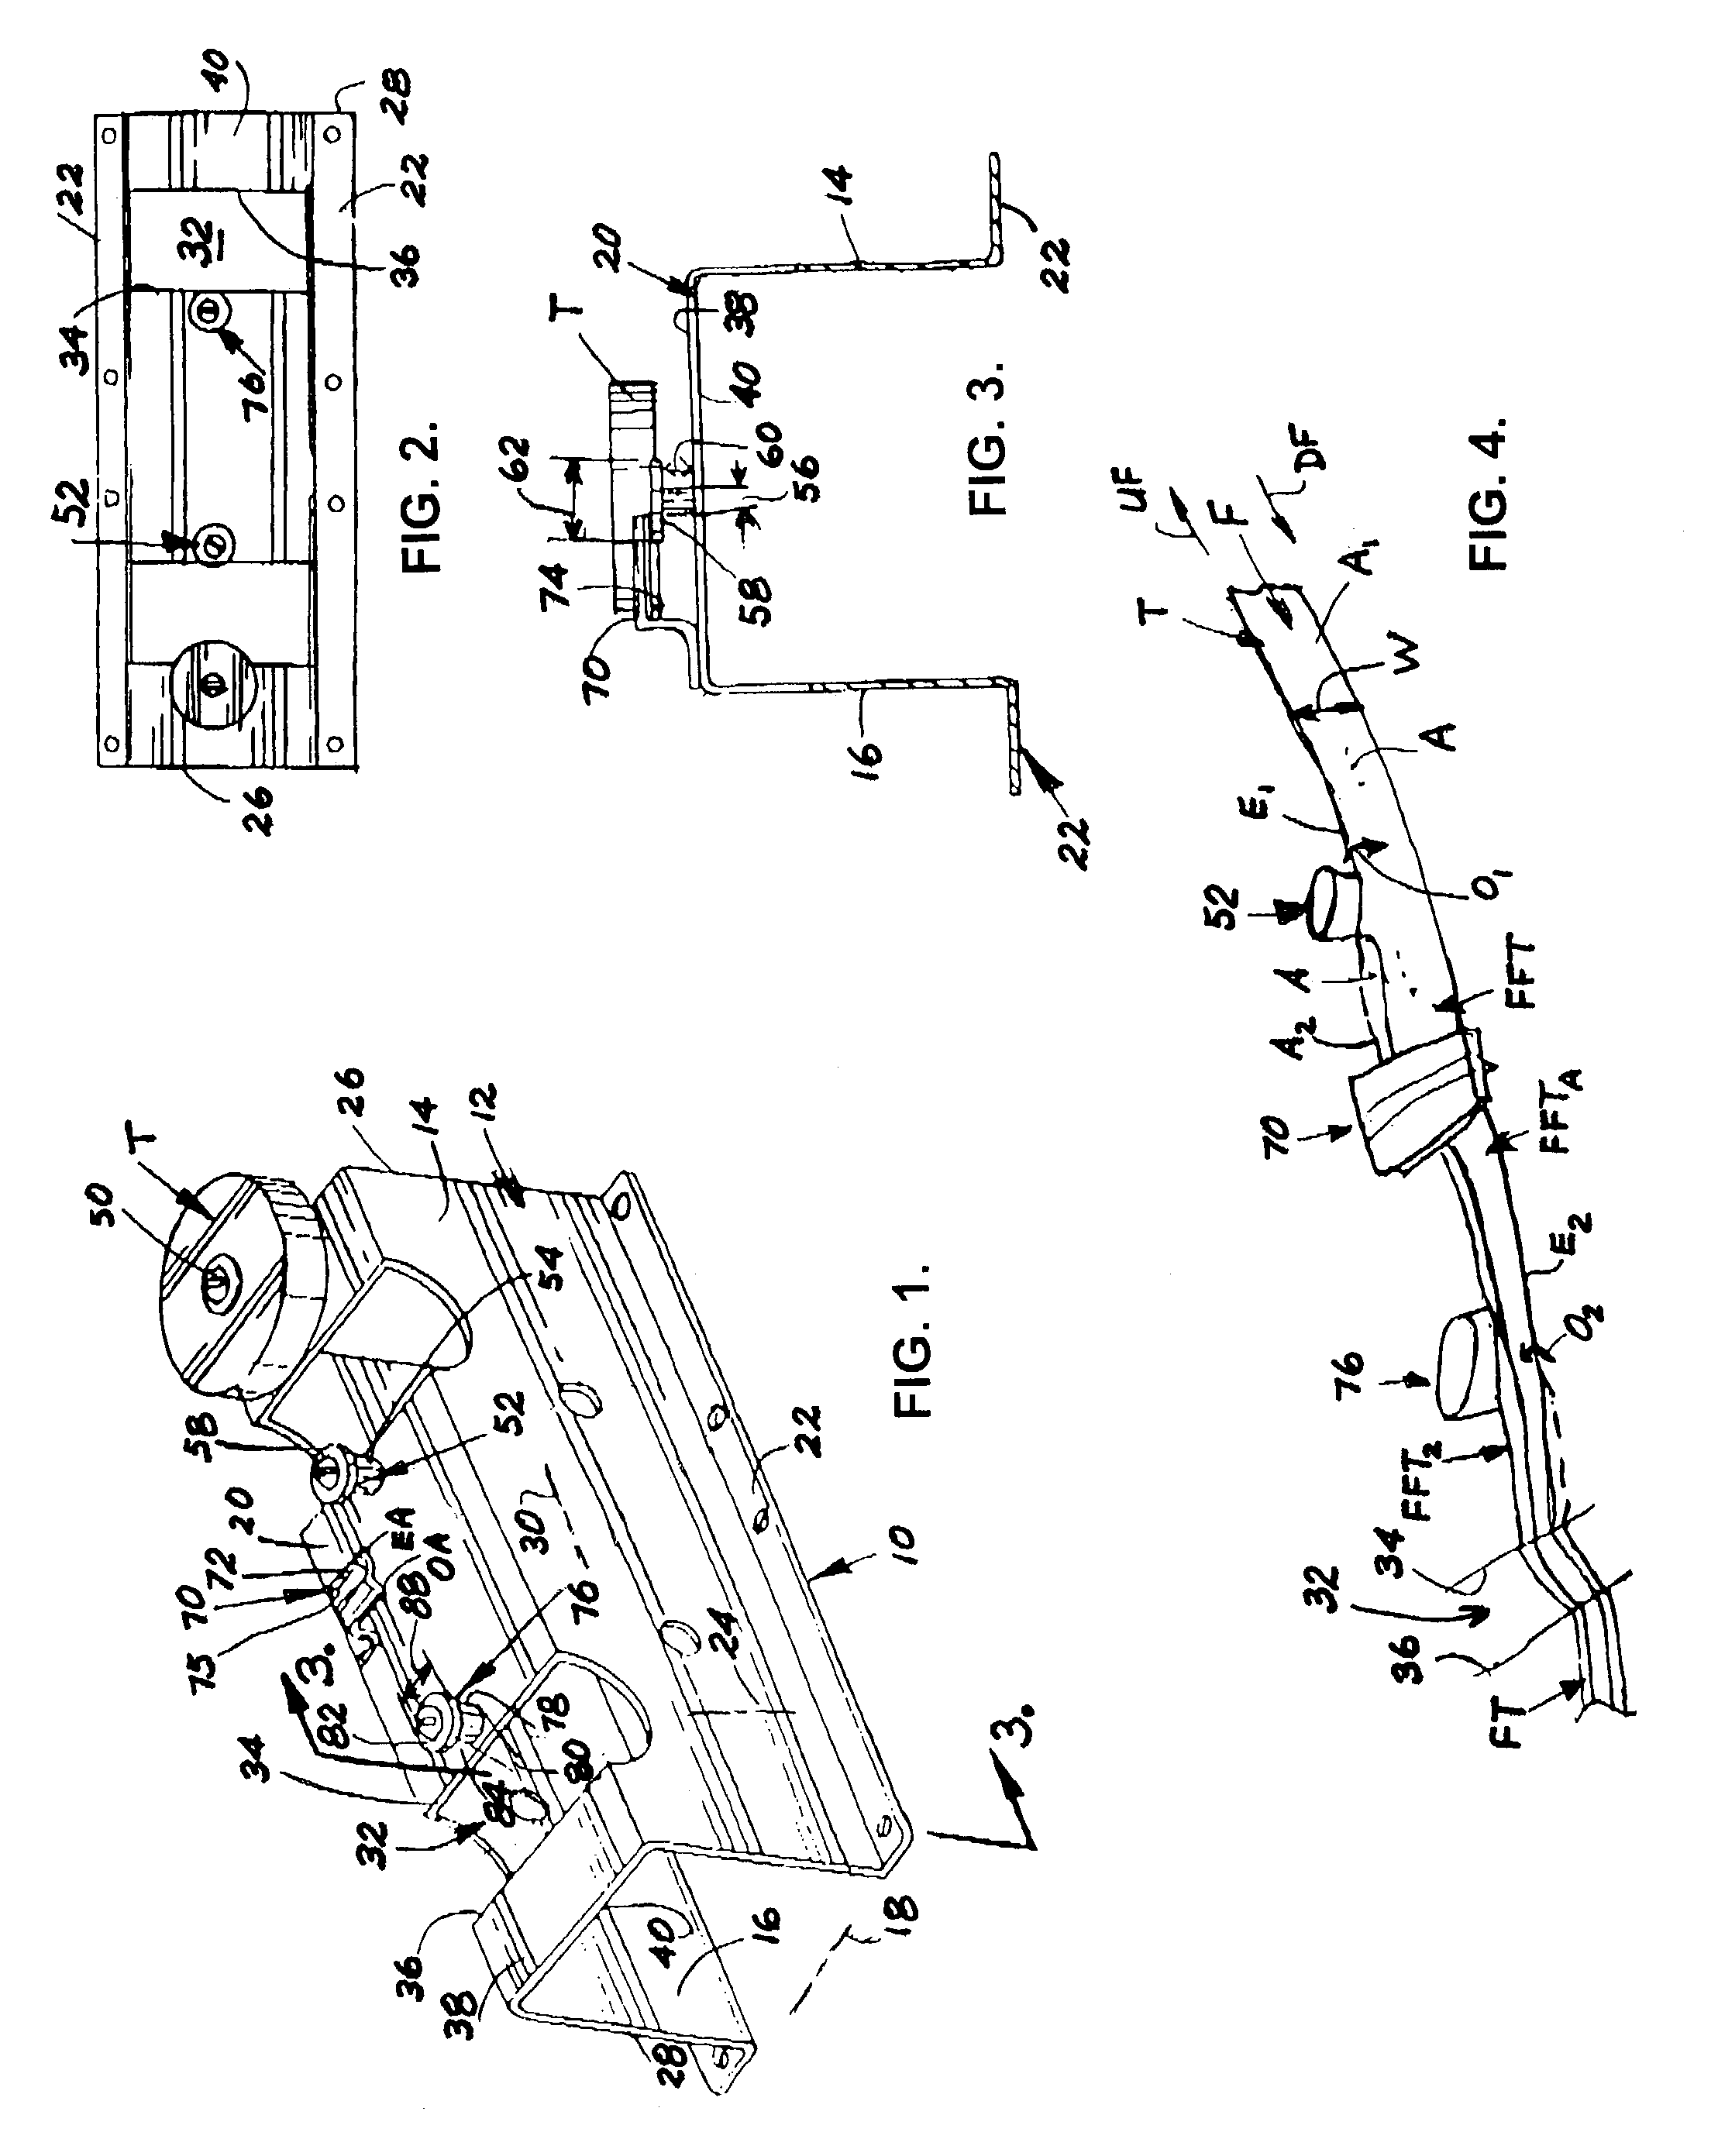 Apparatus for folding adhesive tape